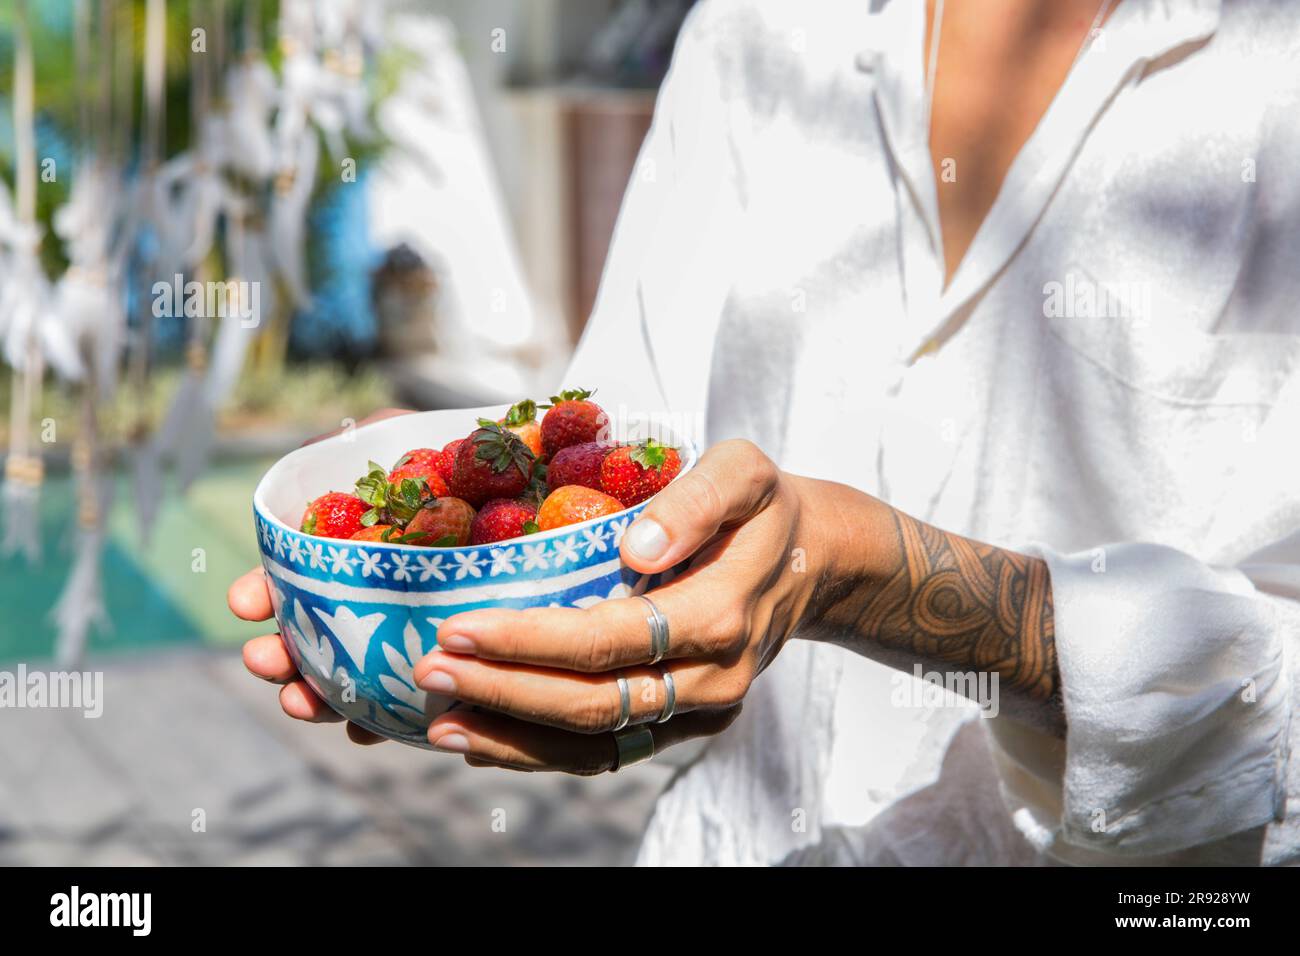 Woman holding fresh strawberries in bowl Stock Photo